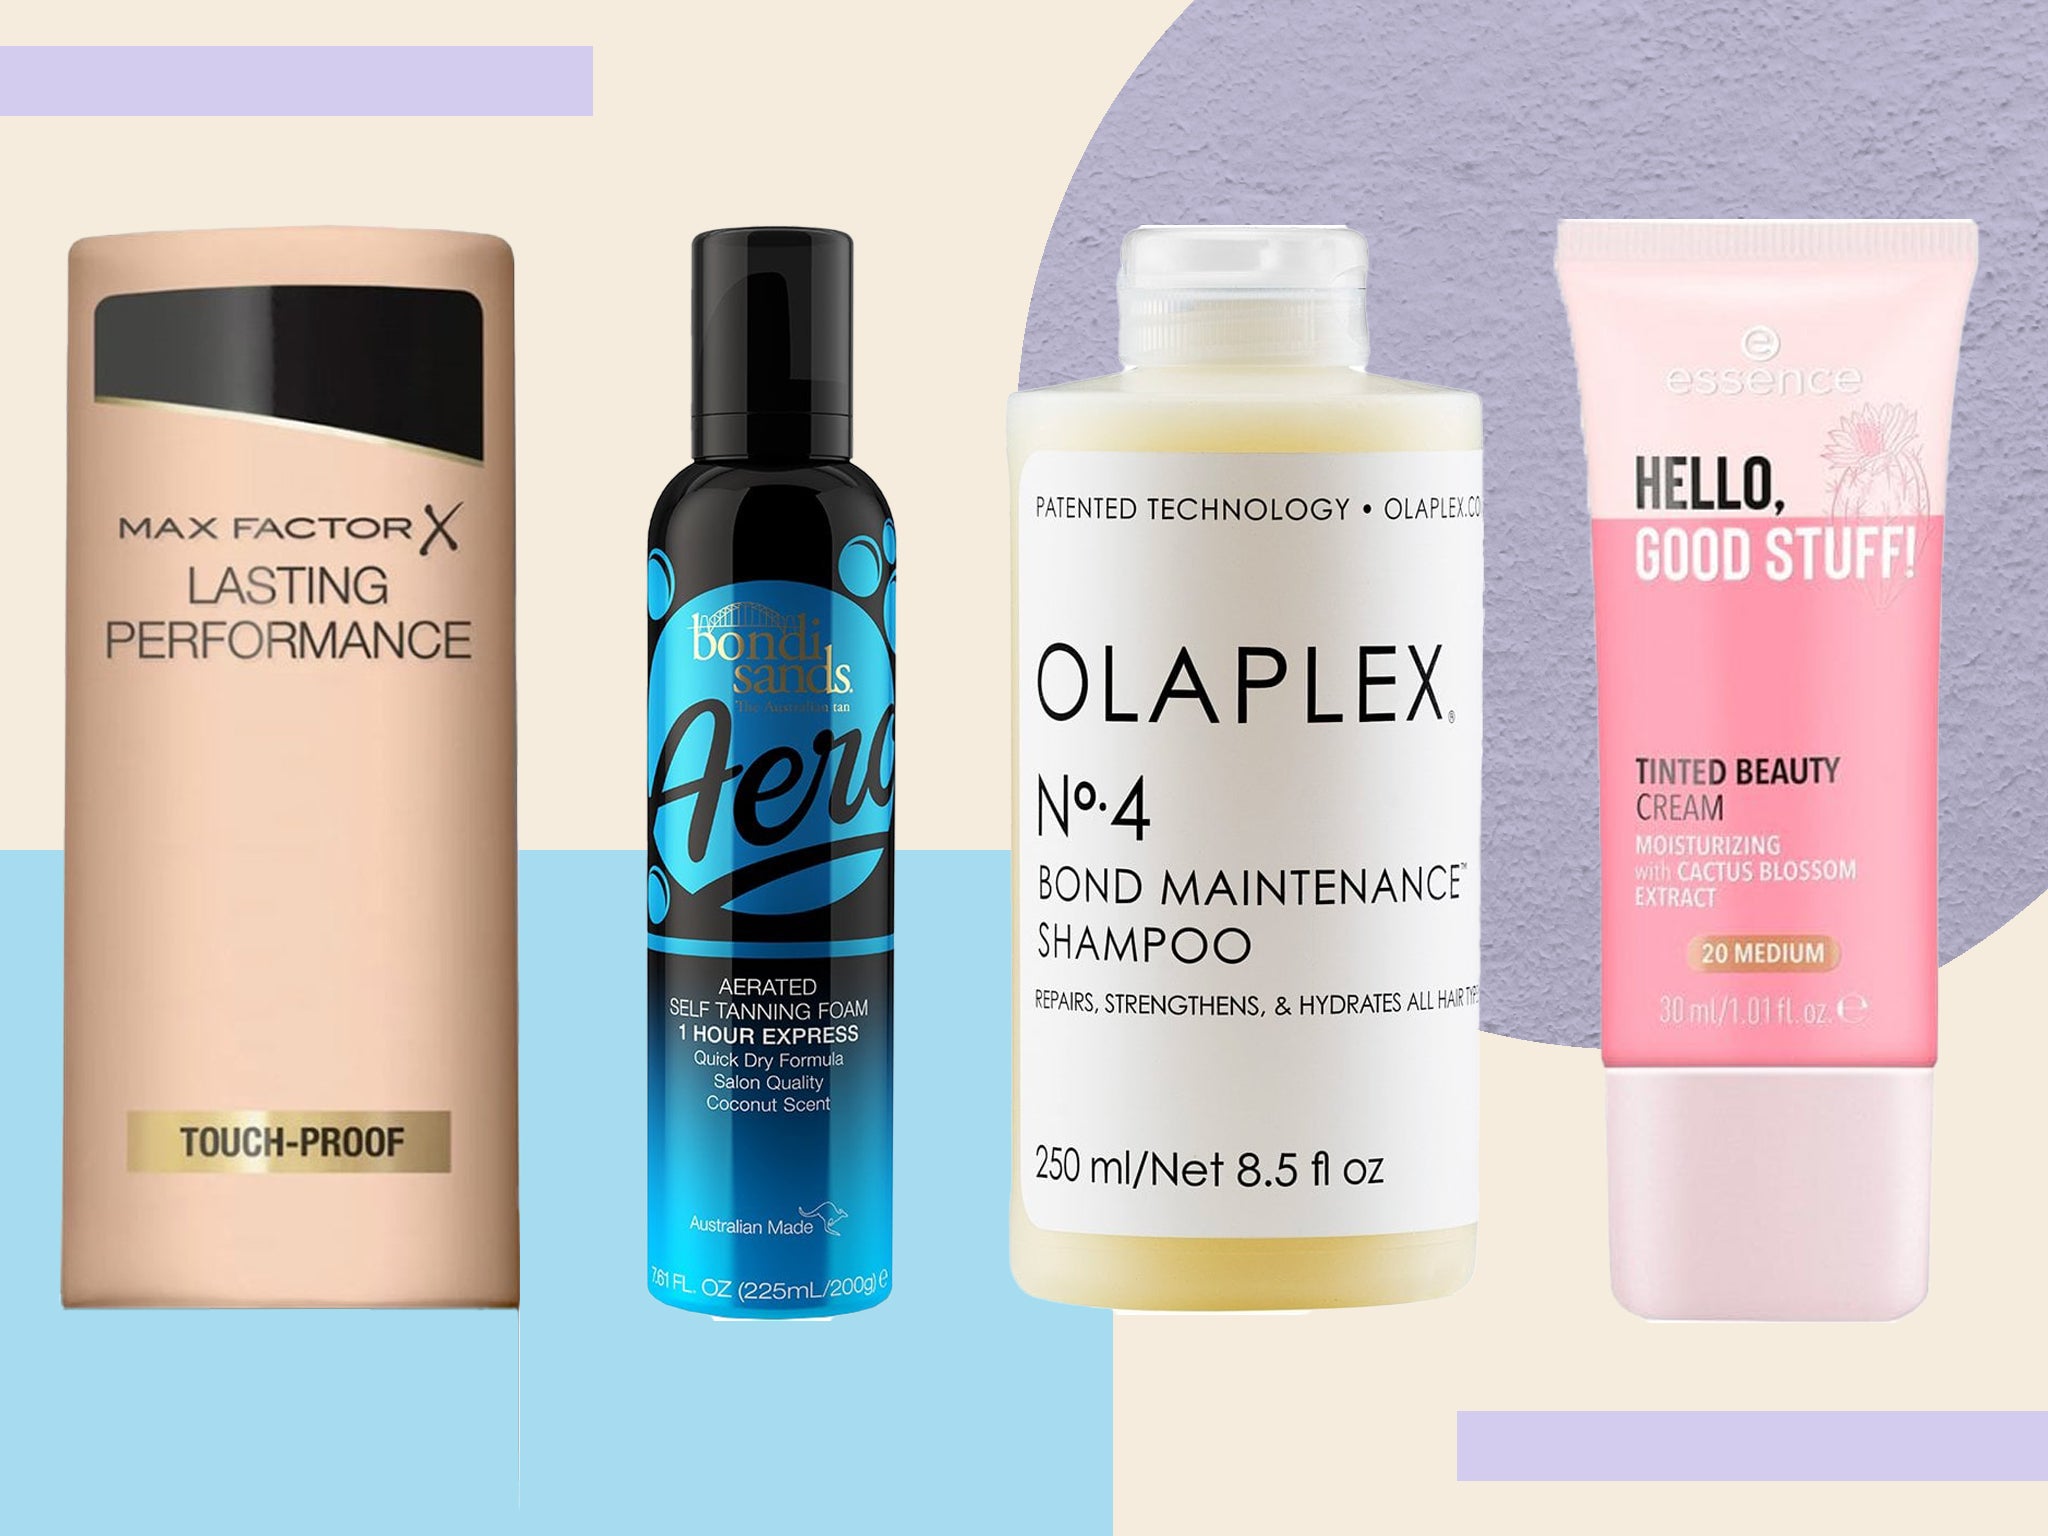 From self tan and shampoo to lip oils and foundation, there’s something for everyone